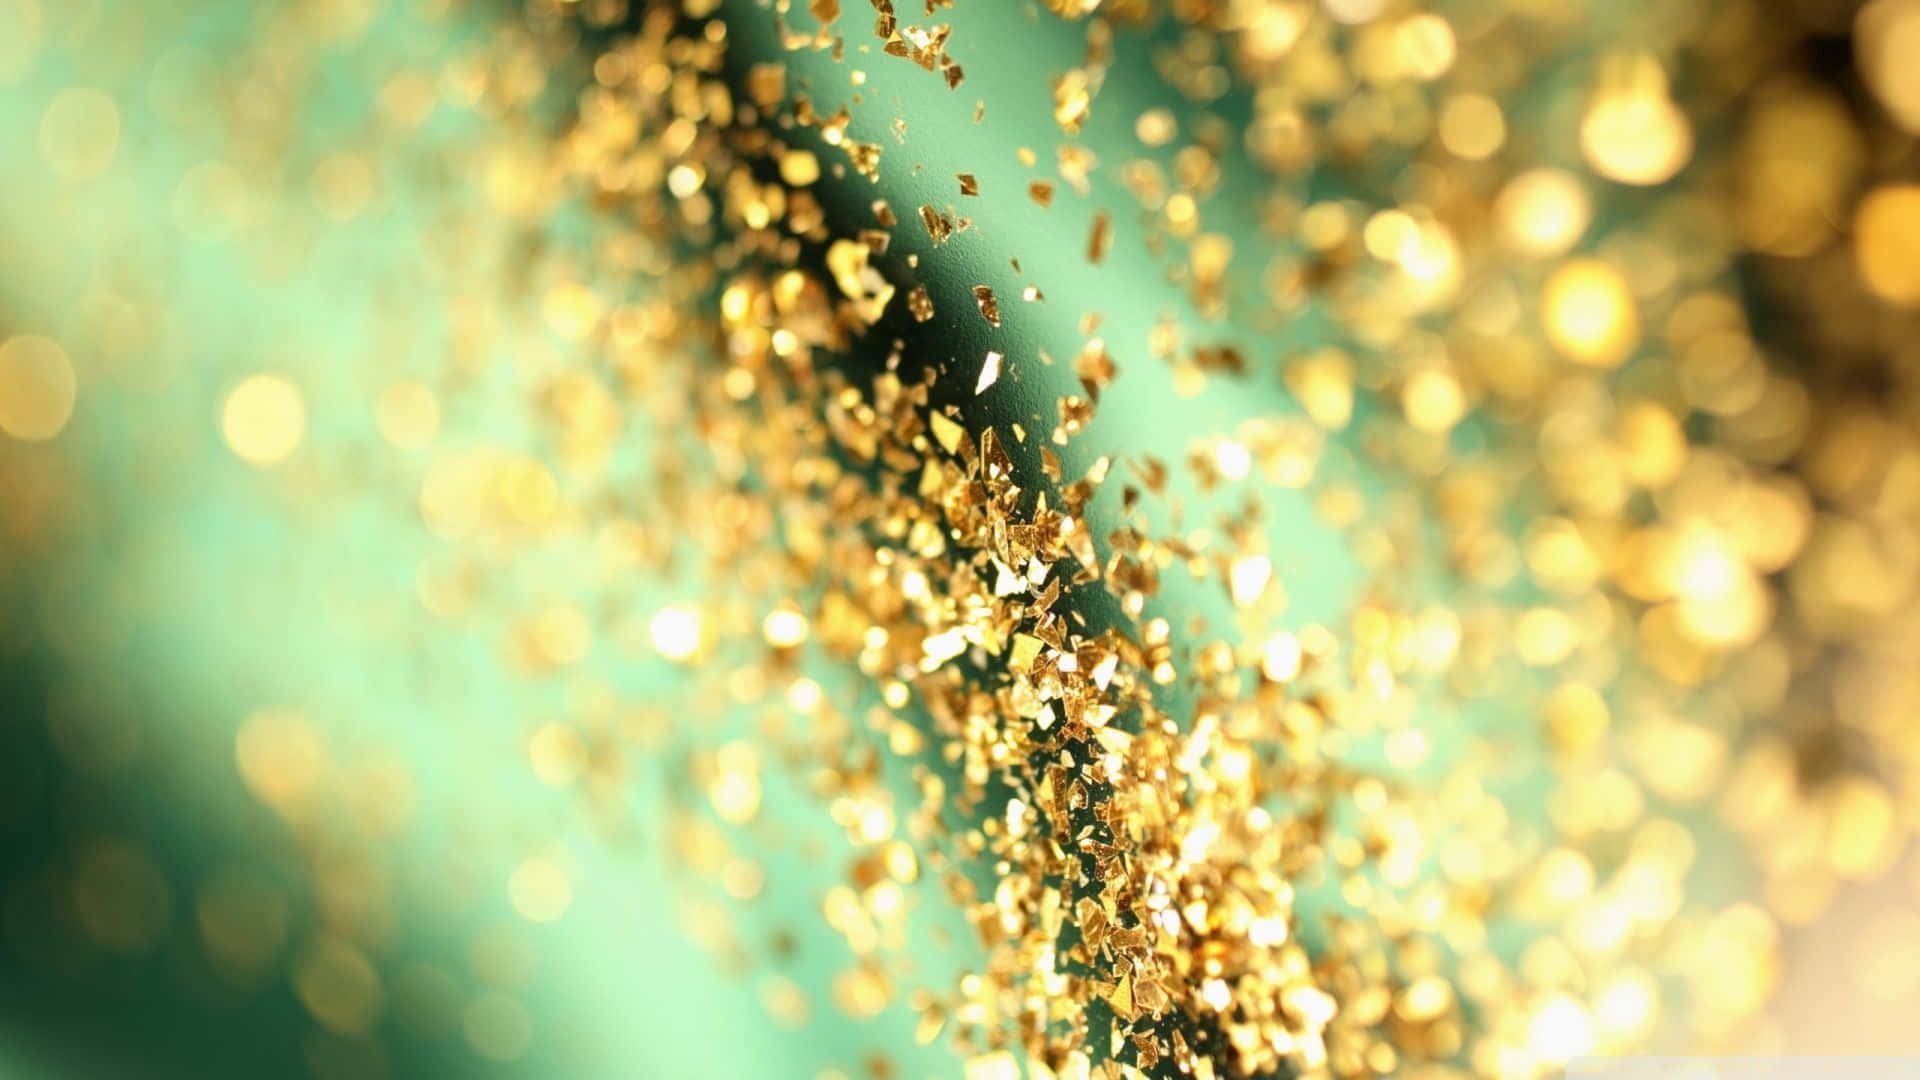 Add a little sparkle to your life with this glittery aesthetic. Wallpaper